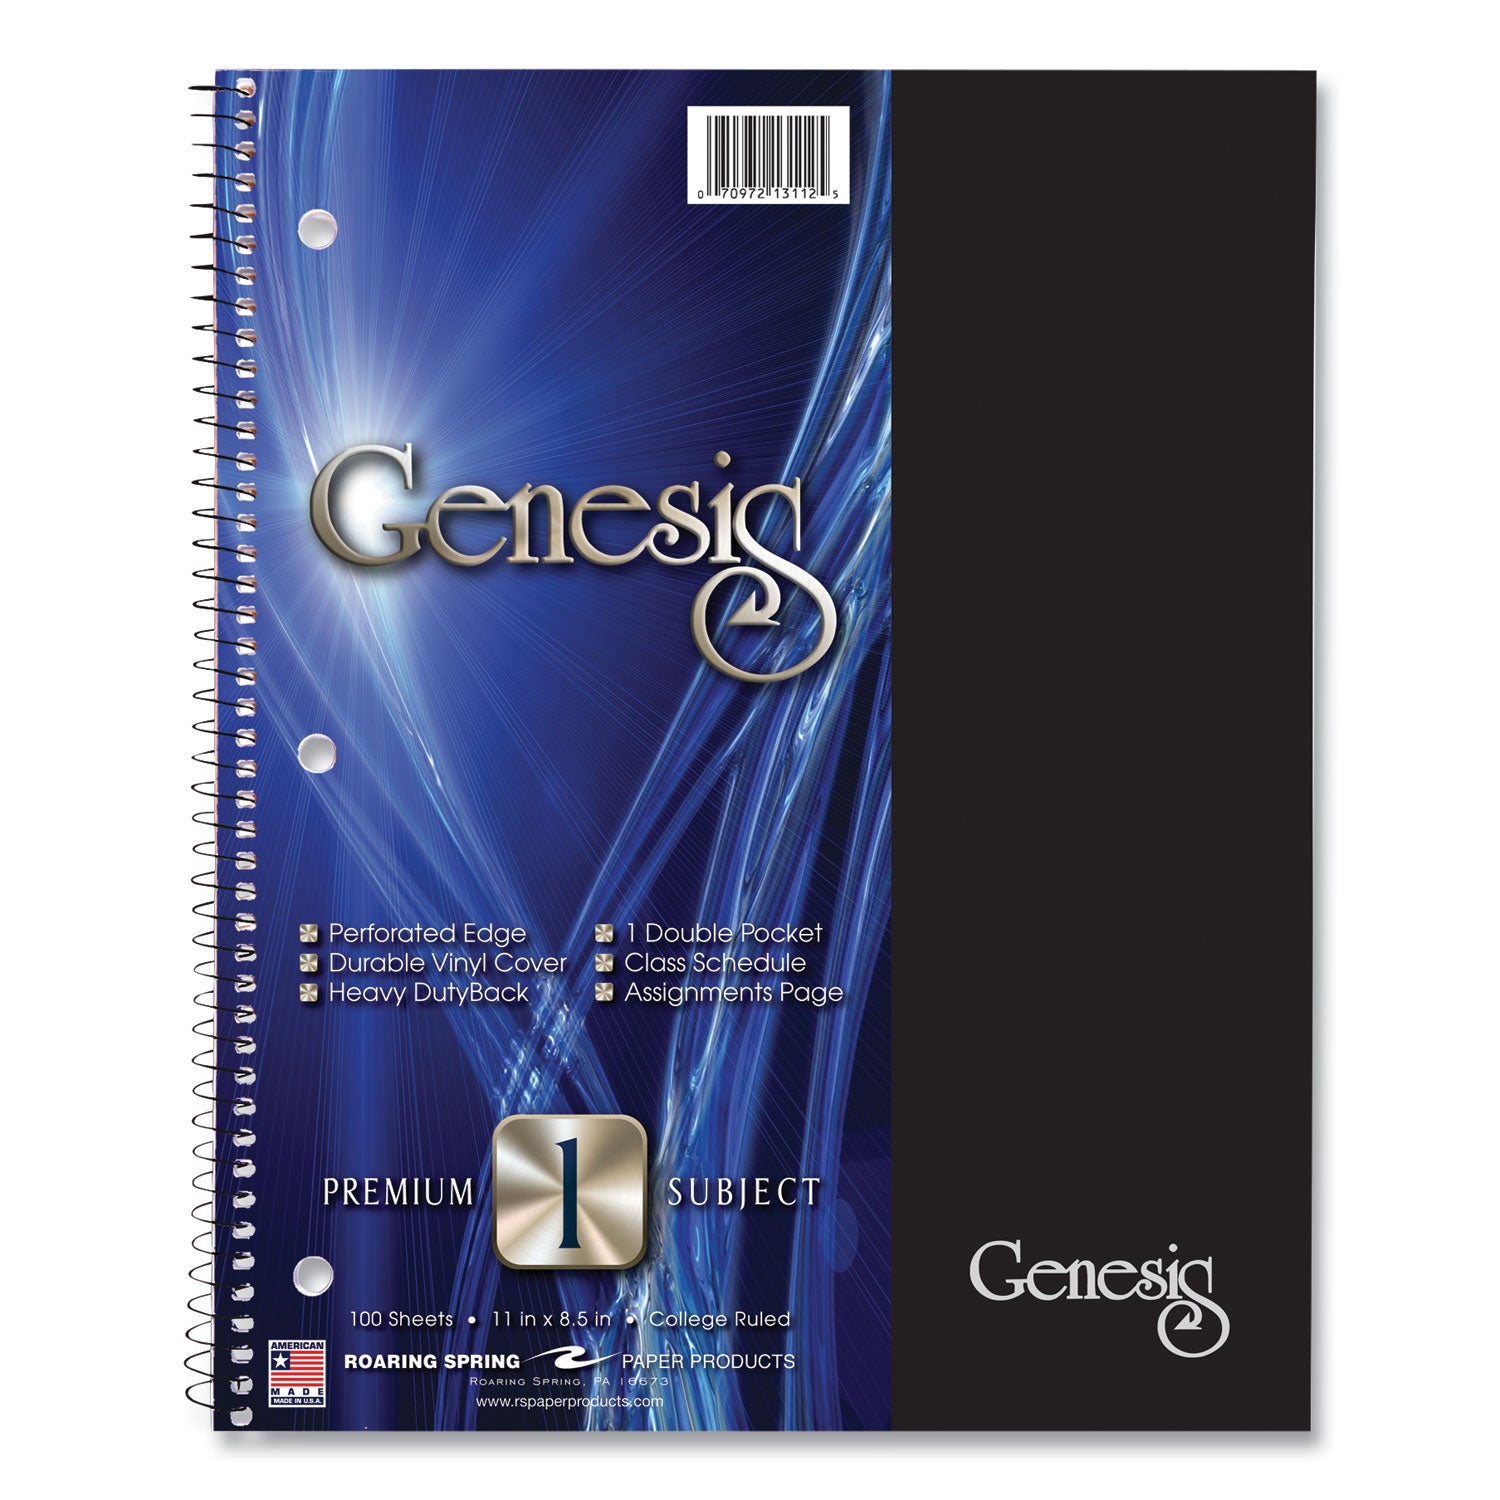 genesis-notebook-1-subject-medium-college-rule-randomly-asst-cover-color-100-11x9-sheets-12-ct-ships-in-4-6-bus-days_roa13112cs - 1